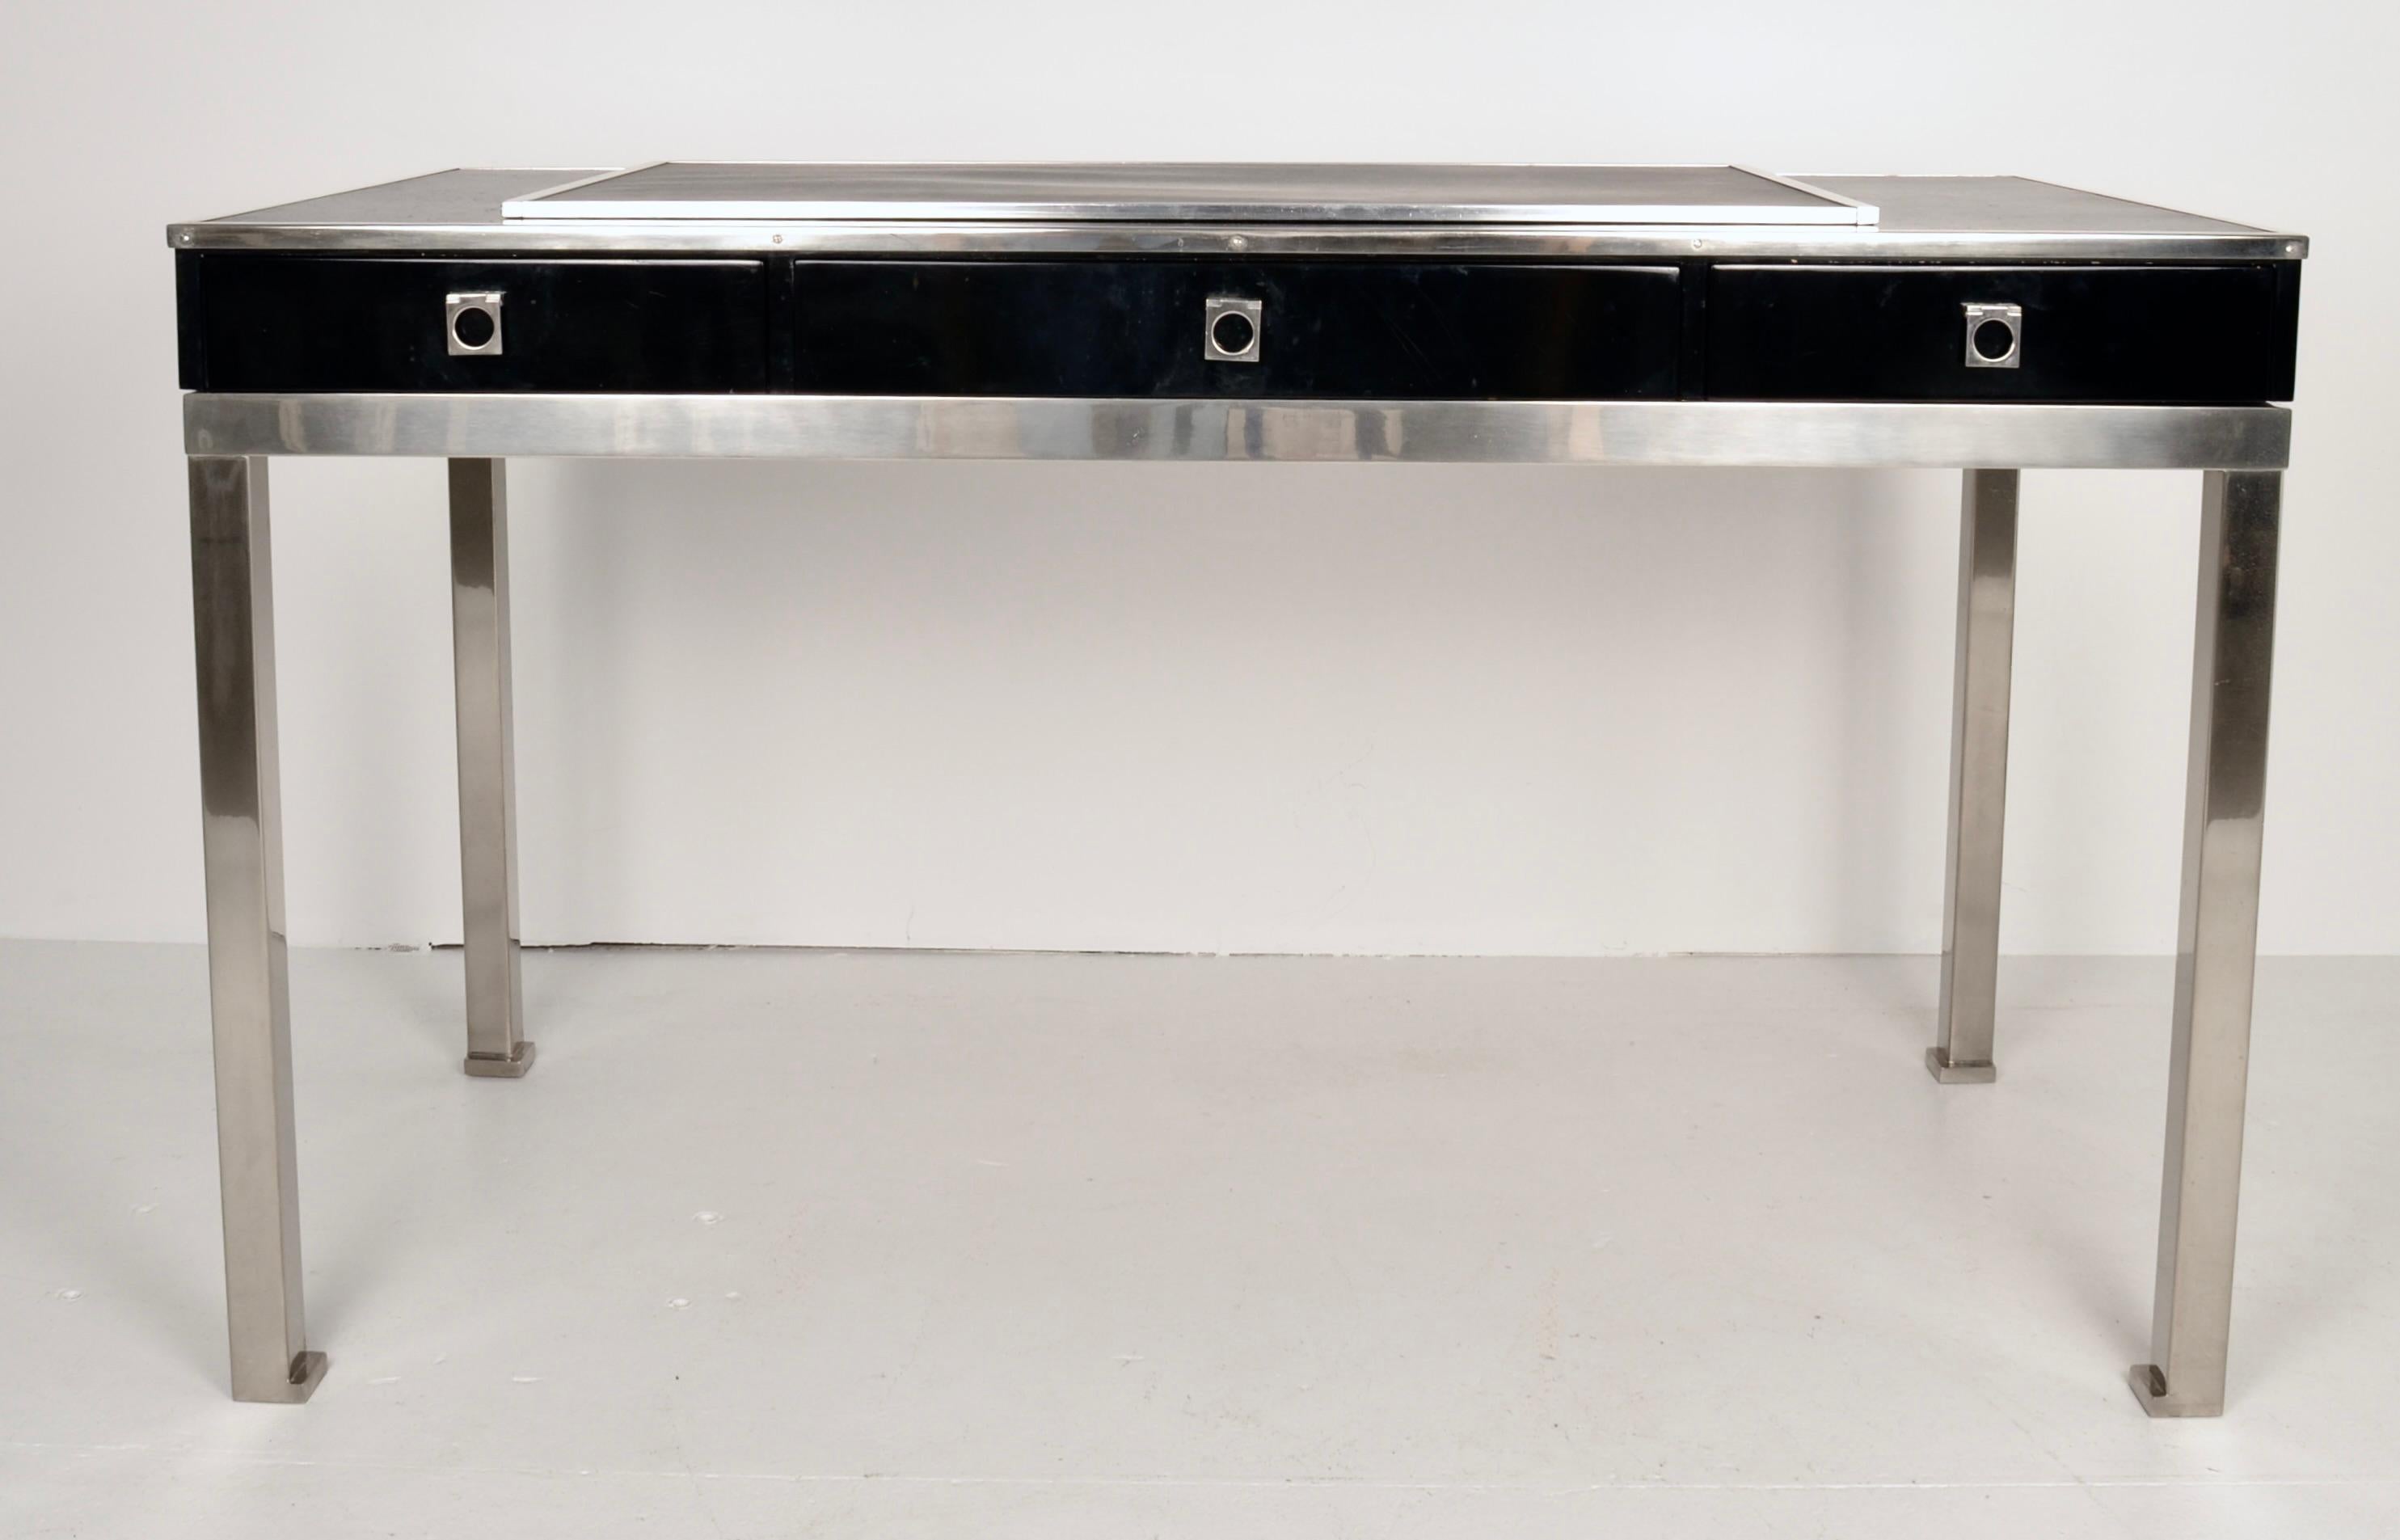 Designed by noted designer Guy LeFevre who worked extensively with Maison Jansen in the 1970s, this handsome desk incorporates many of his signature details. The base and hardware are polished steel, the sides and three drawers have a high gloss